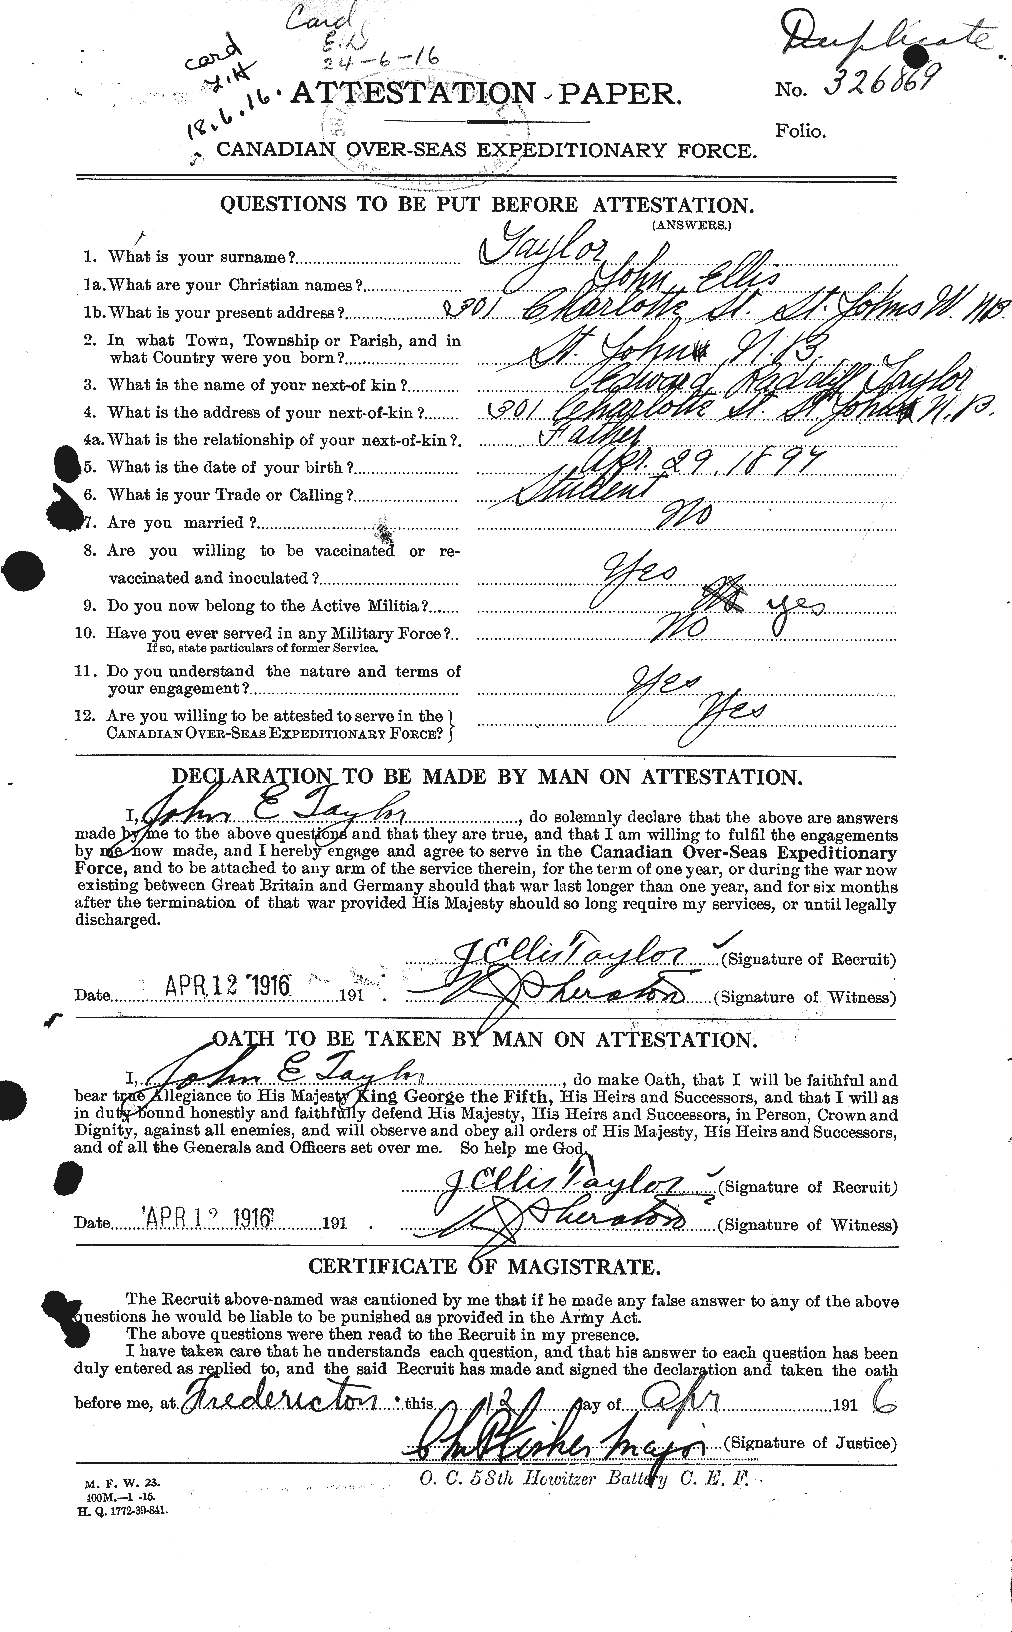 Personnel Records of the First World War - CEF 627084a